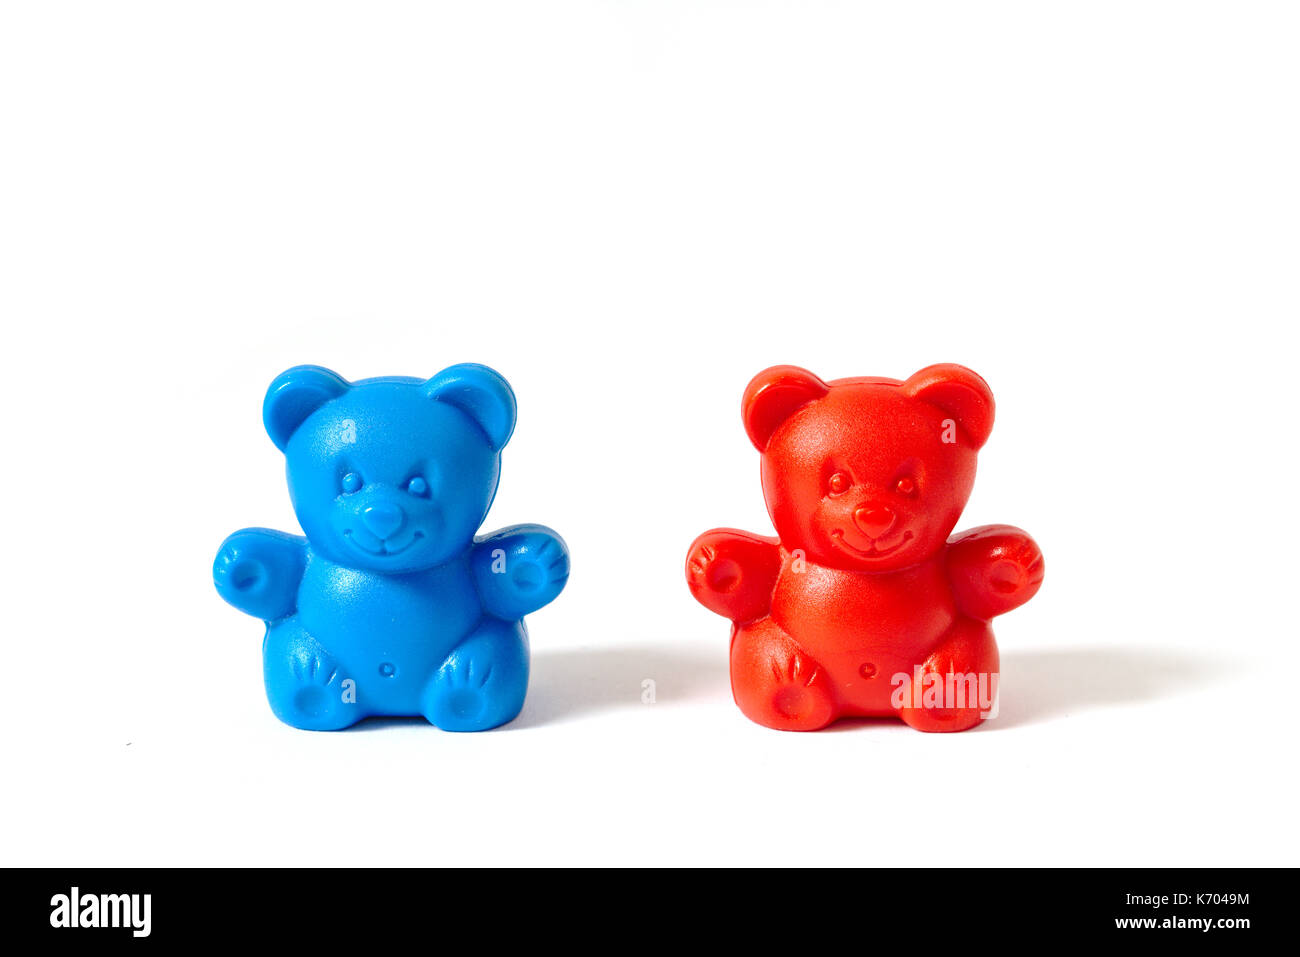 Small red and blue plastic toy bears isolated on white background Stock Photo